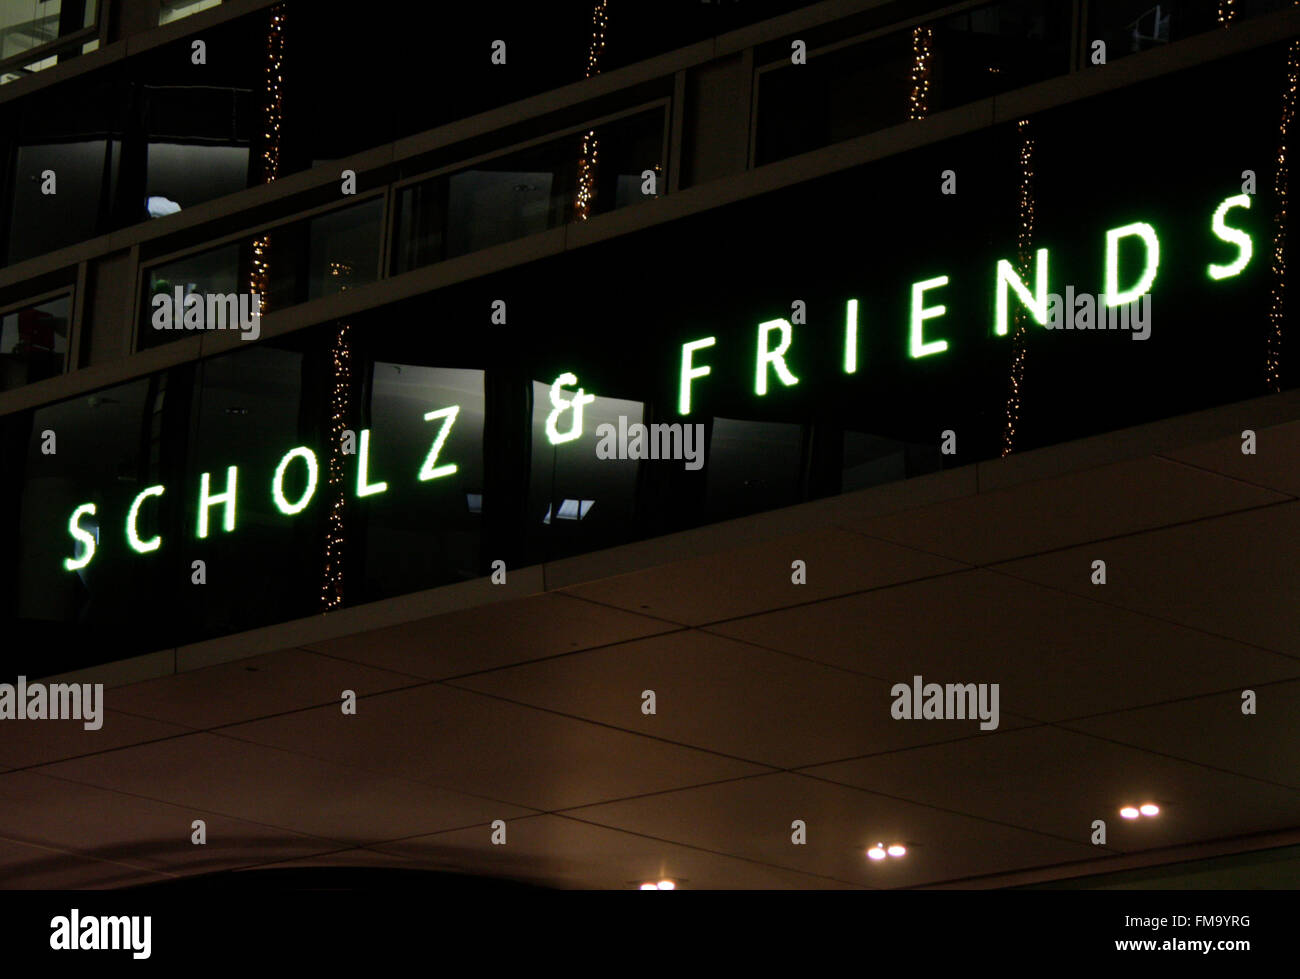 Scholz & Friends on X: @Campaignmag For the new international